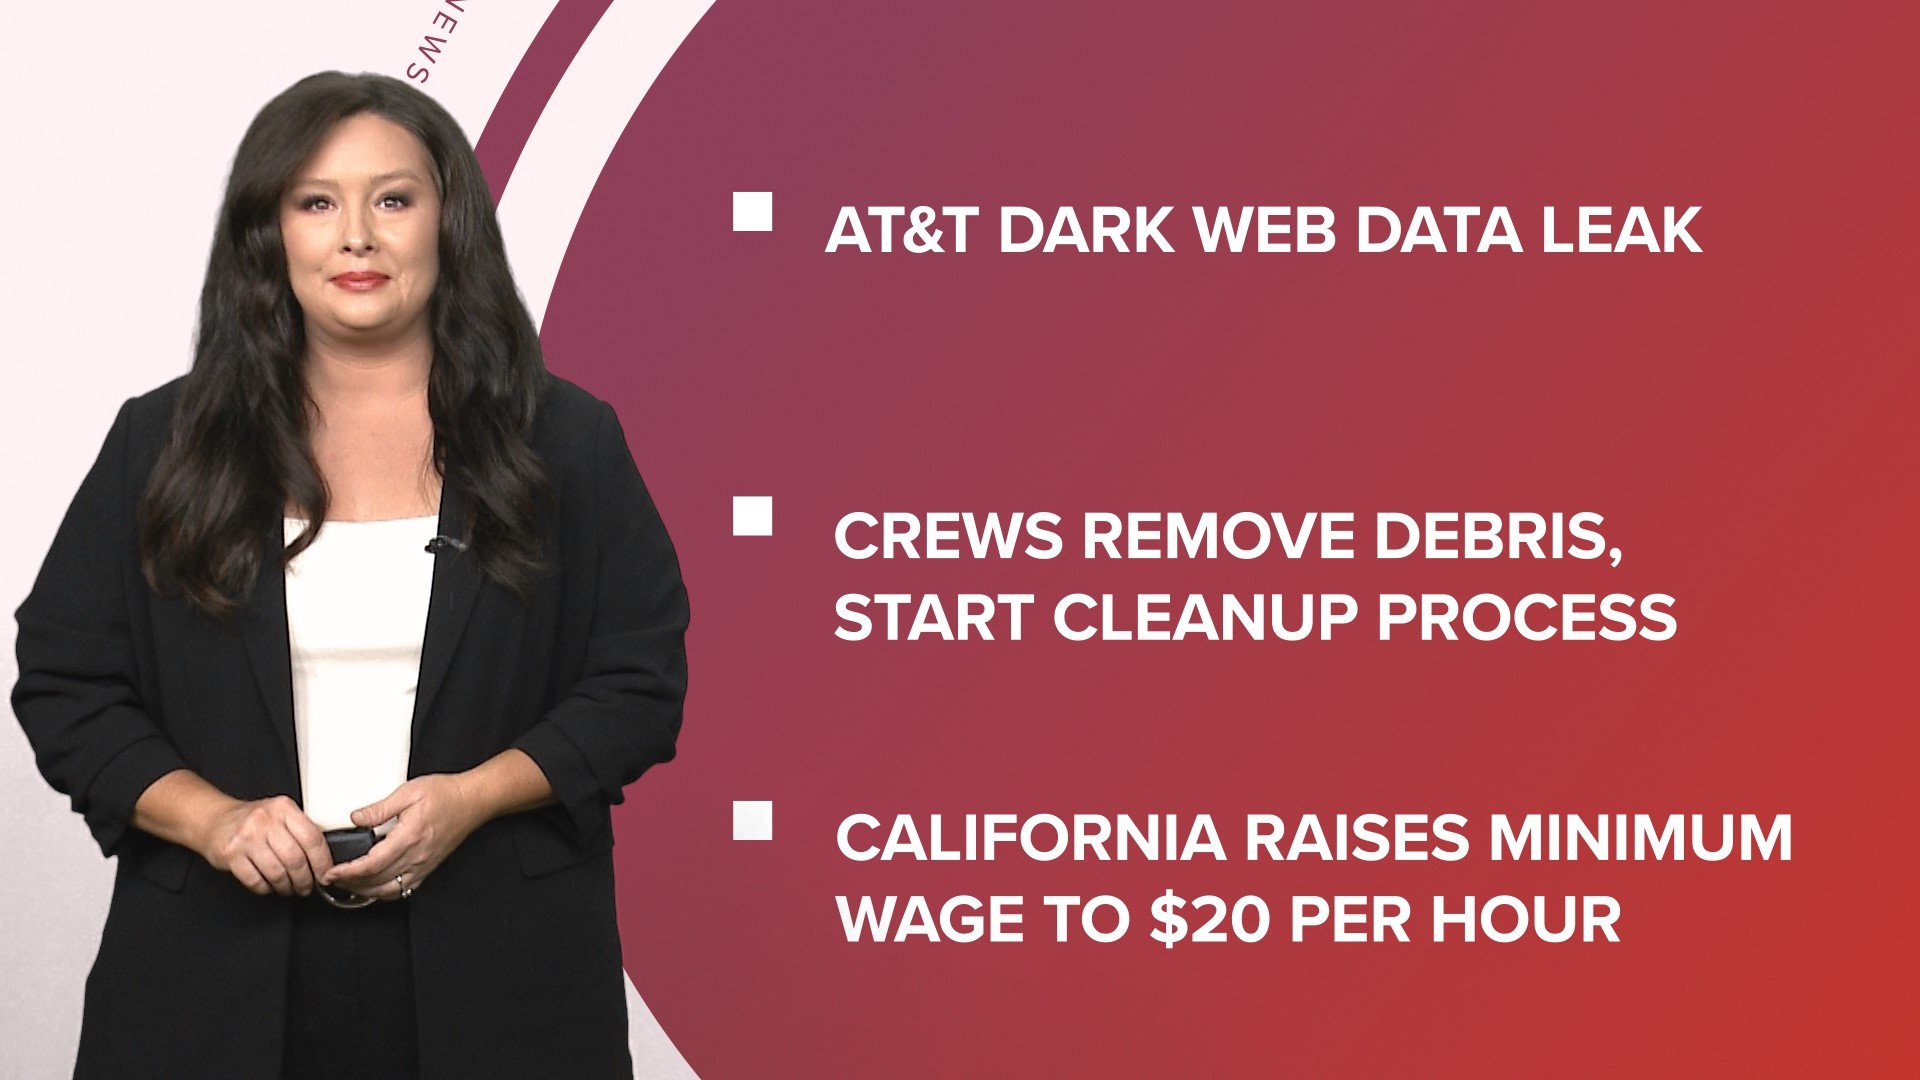 A look at what is happening in the news from a data leak to an update on the Baltimore bridge collapse and California raises minimum wage for fast food workers.